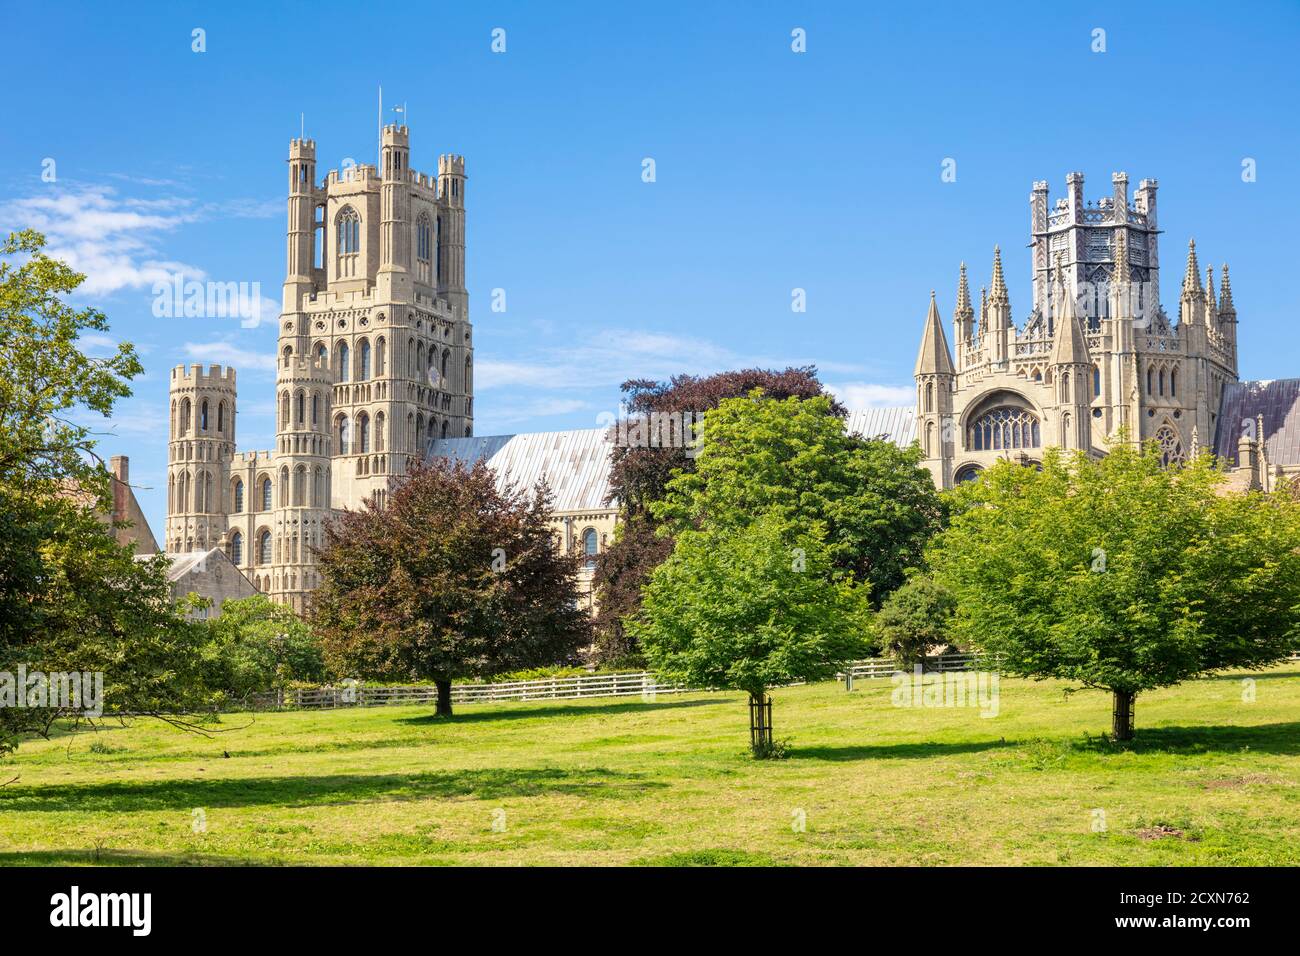 Ely uk Ely o Cattedrale Chiesa del Santo E la Trinità indivisa da Ely Park Ely Anglican cattedrale Ely Cambridgeshire Inghilterra UK GB Foto Stock